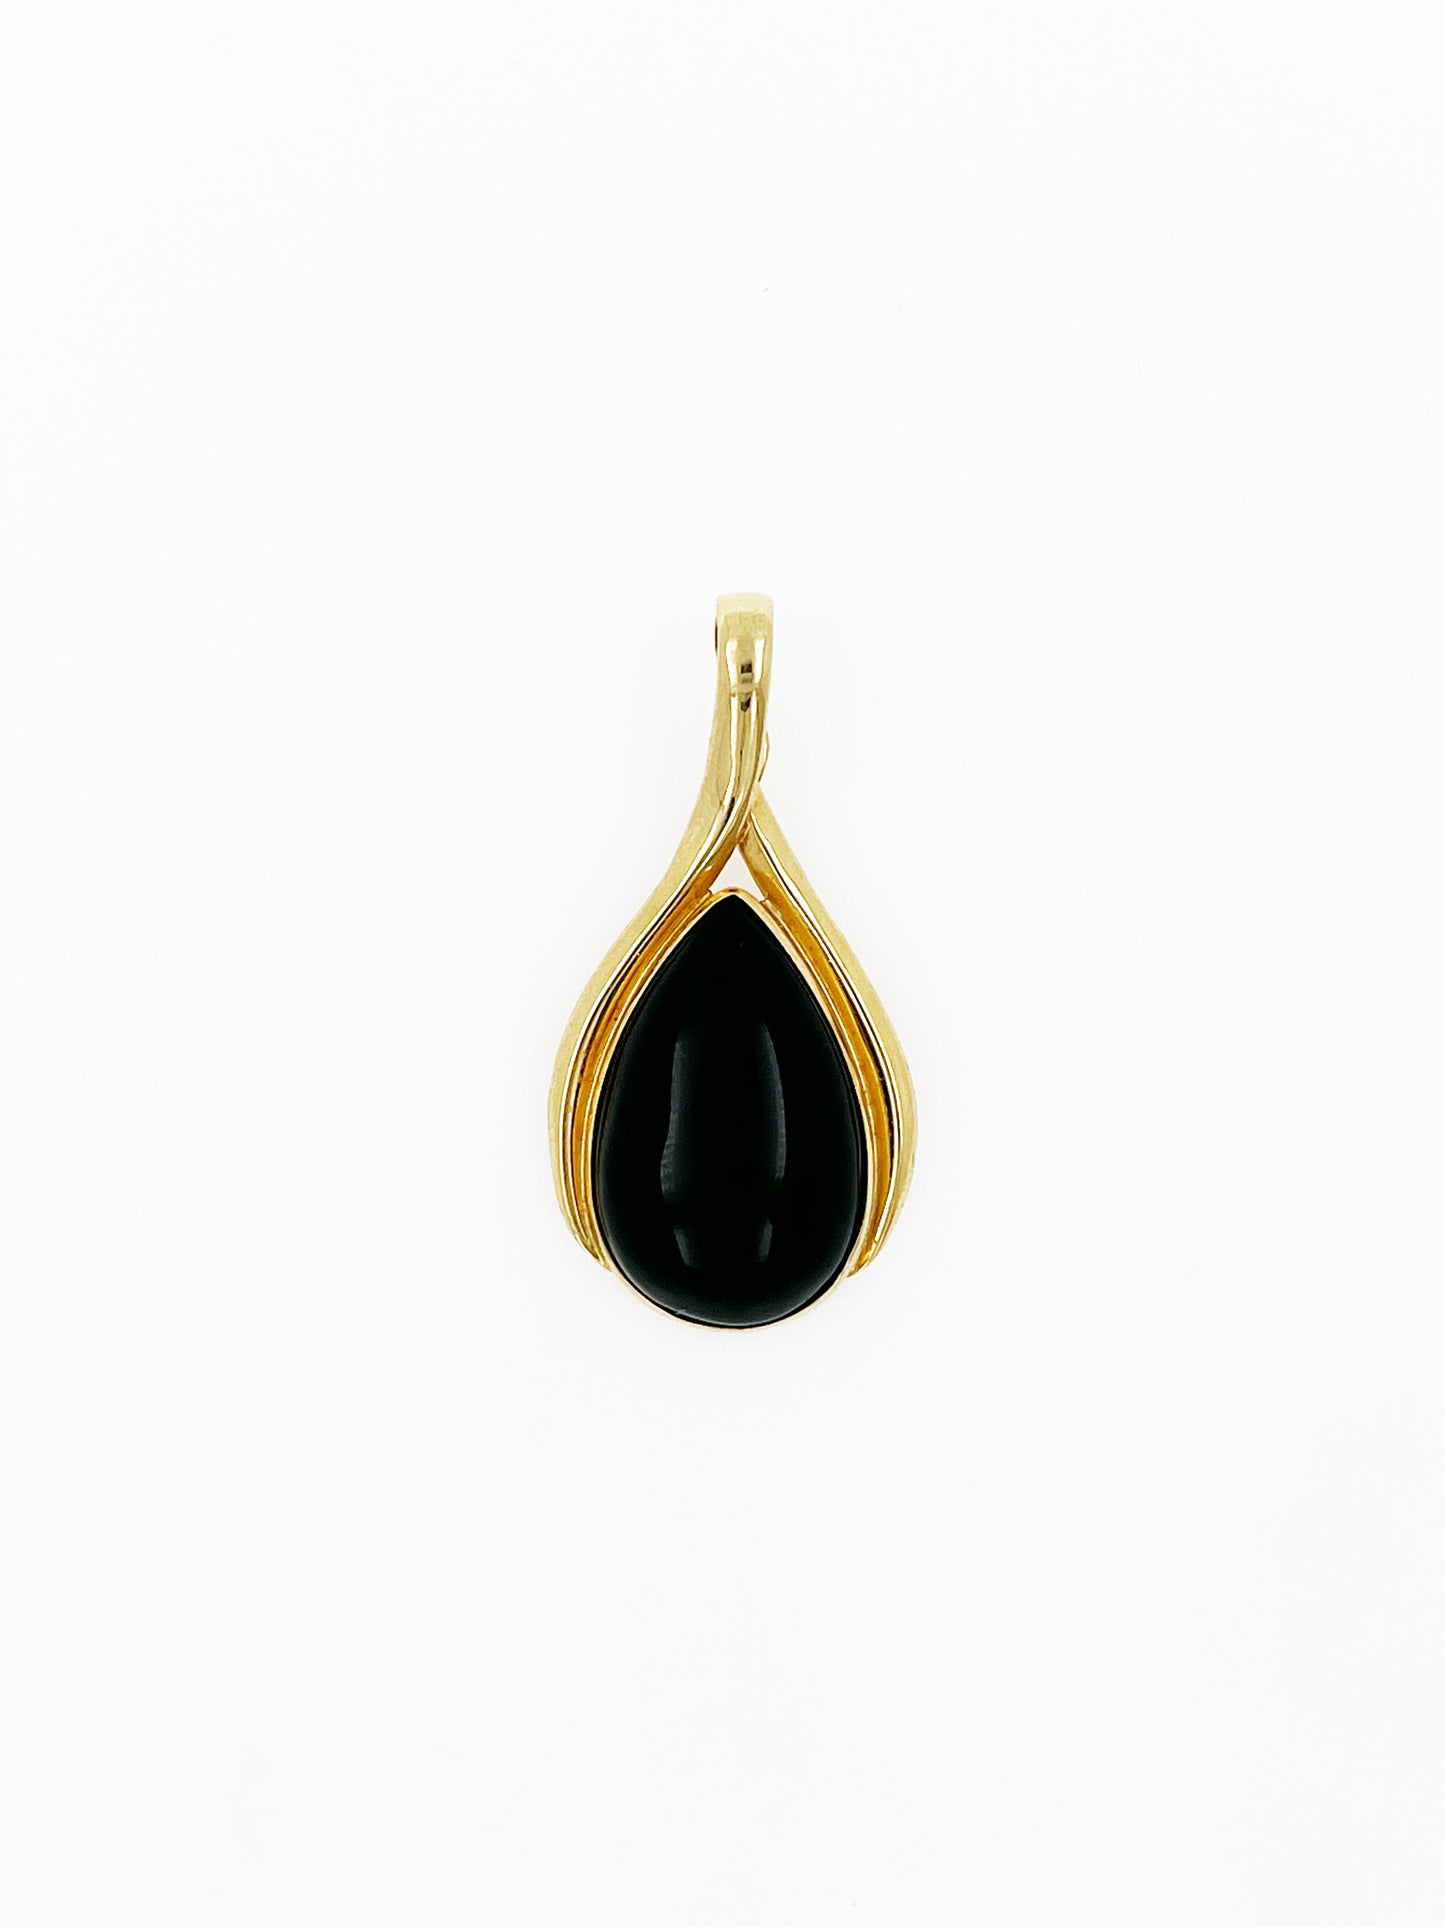 Pear Shaped Onyx Cabochon Pendant in 14k Yellow Gold